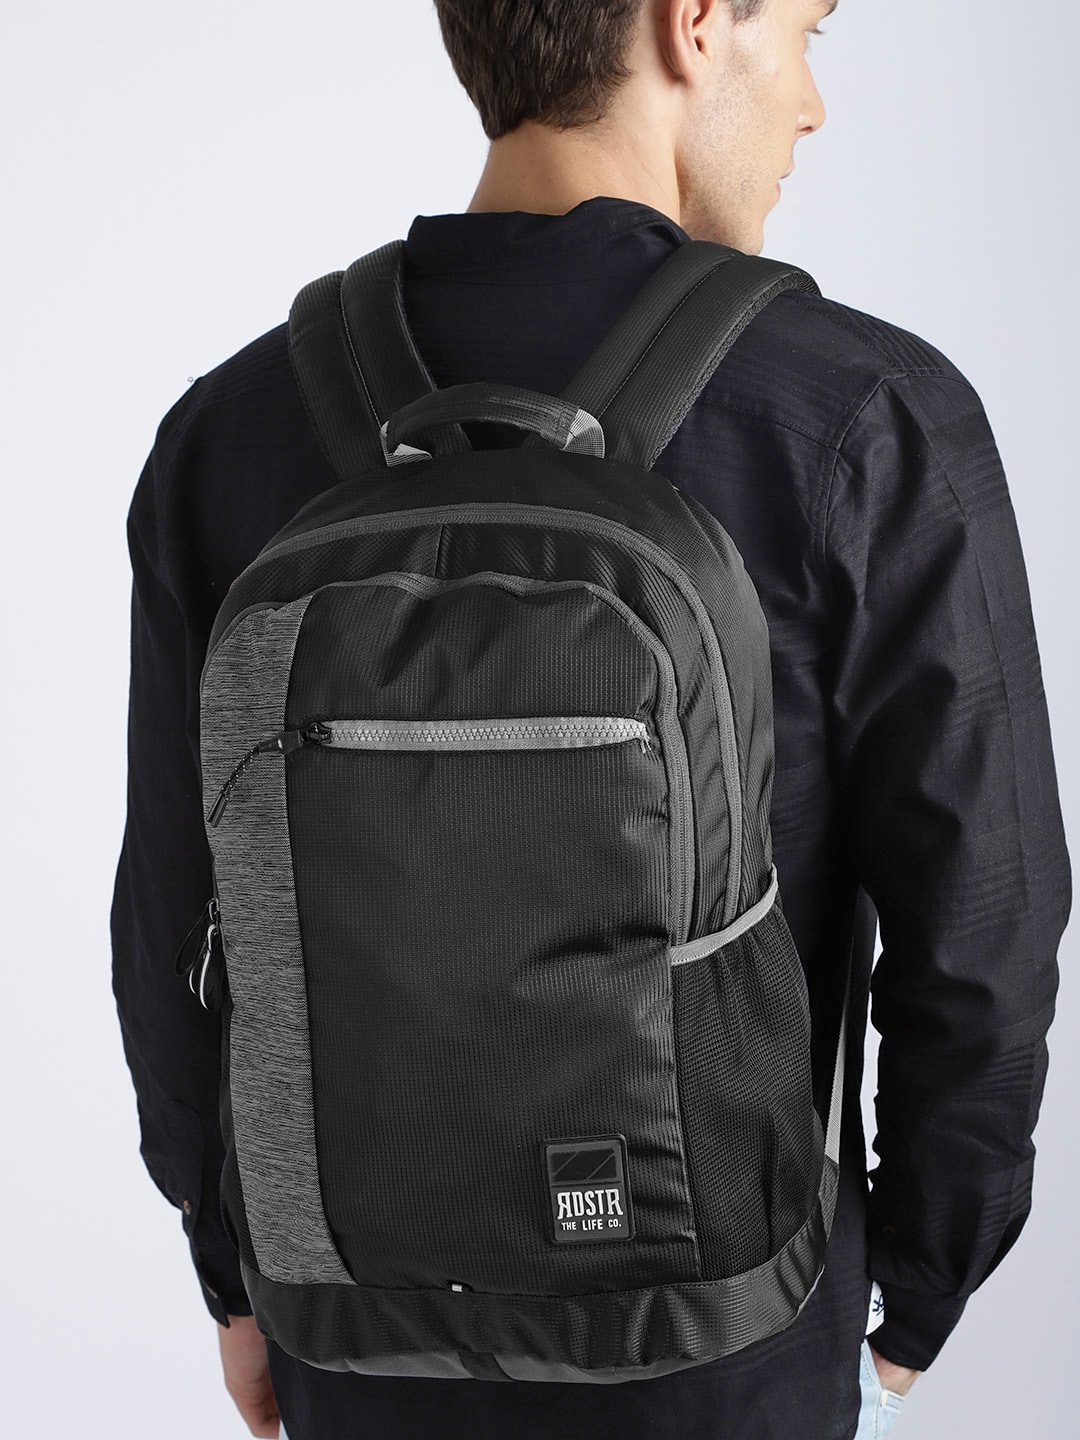 Roadster Unisex Black Solid Backpack Price in India